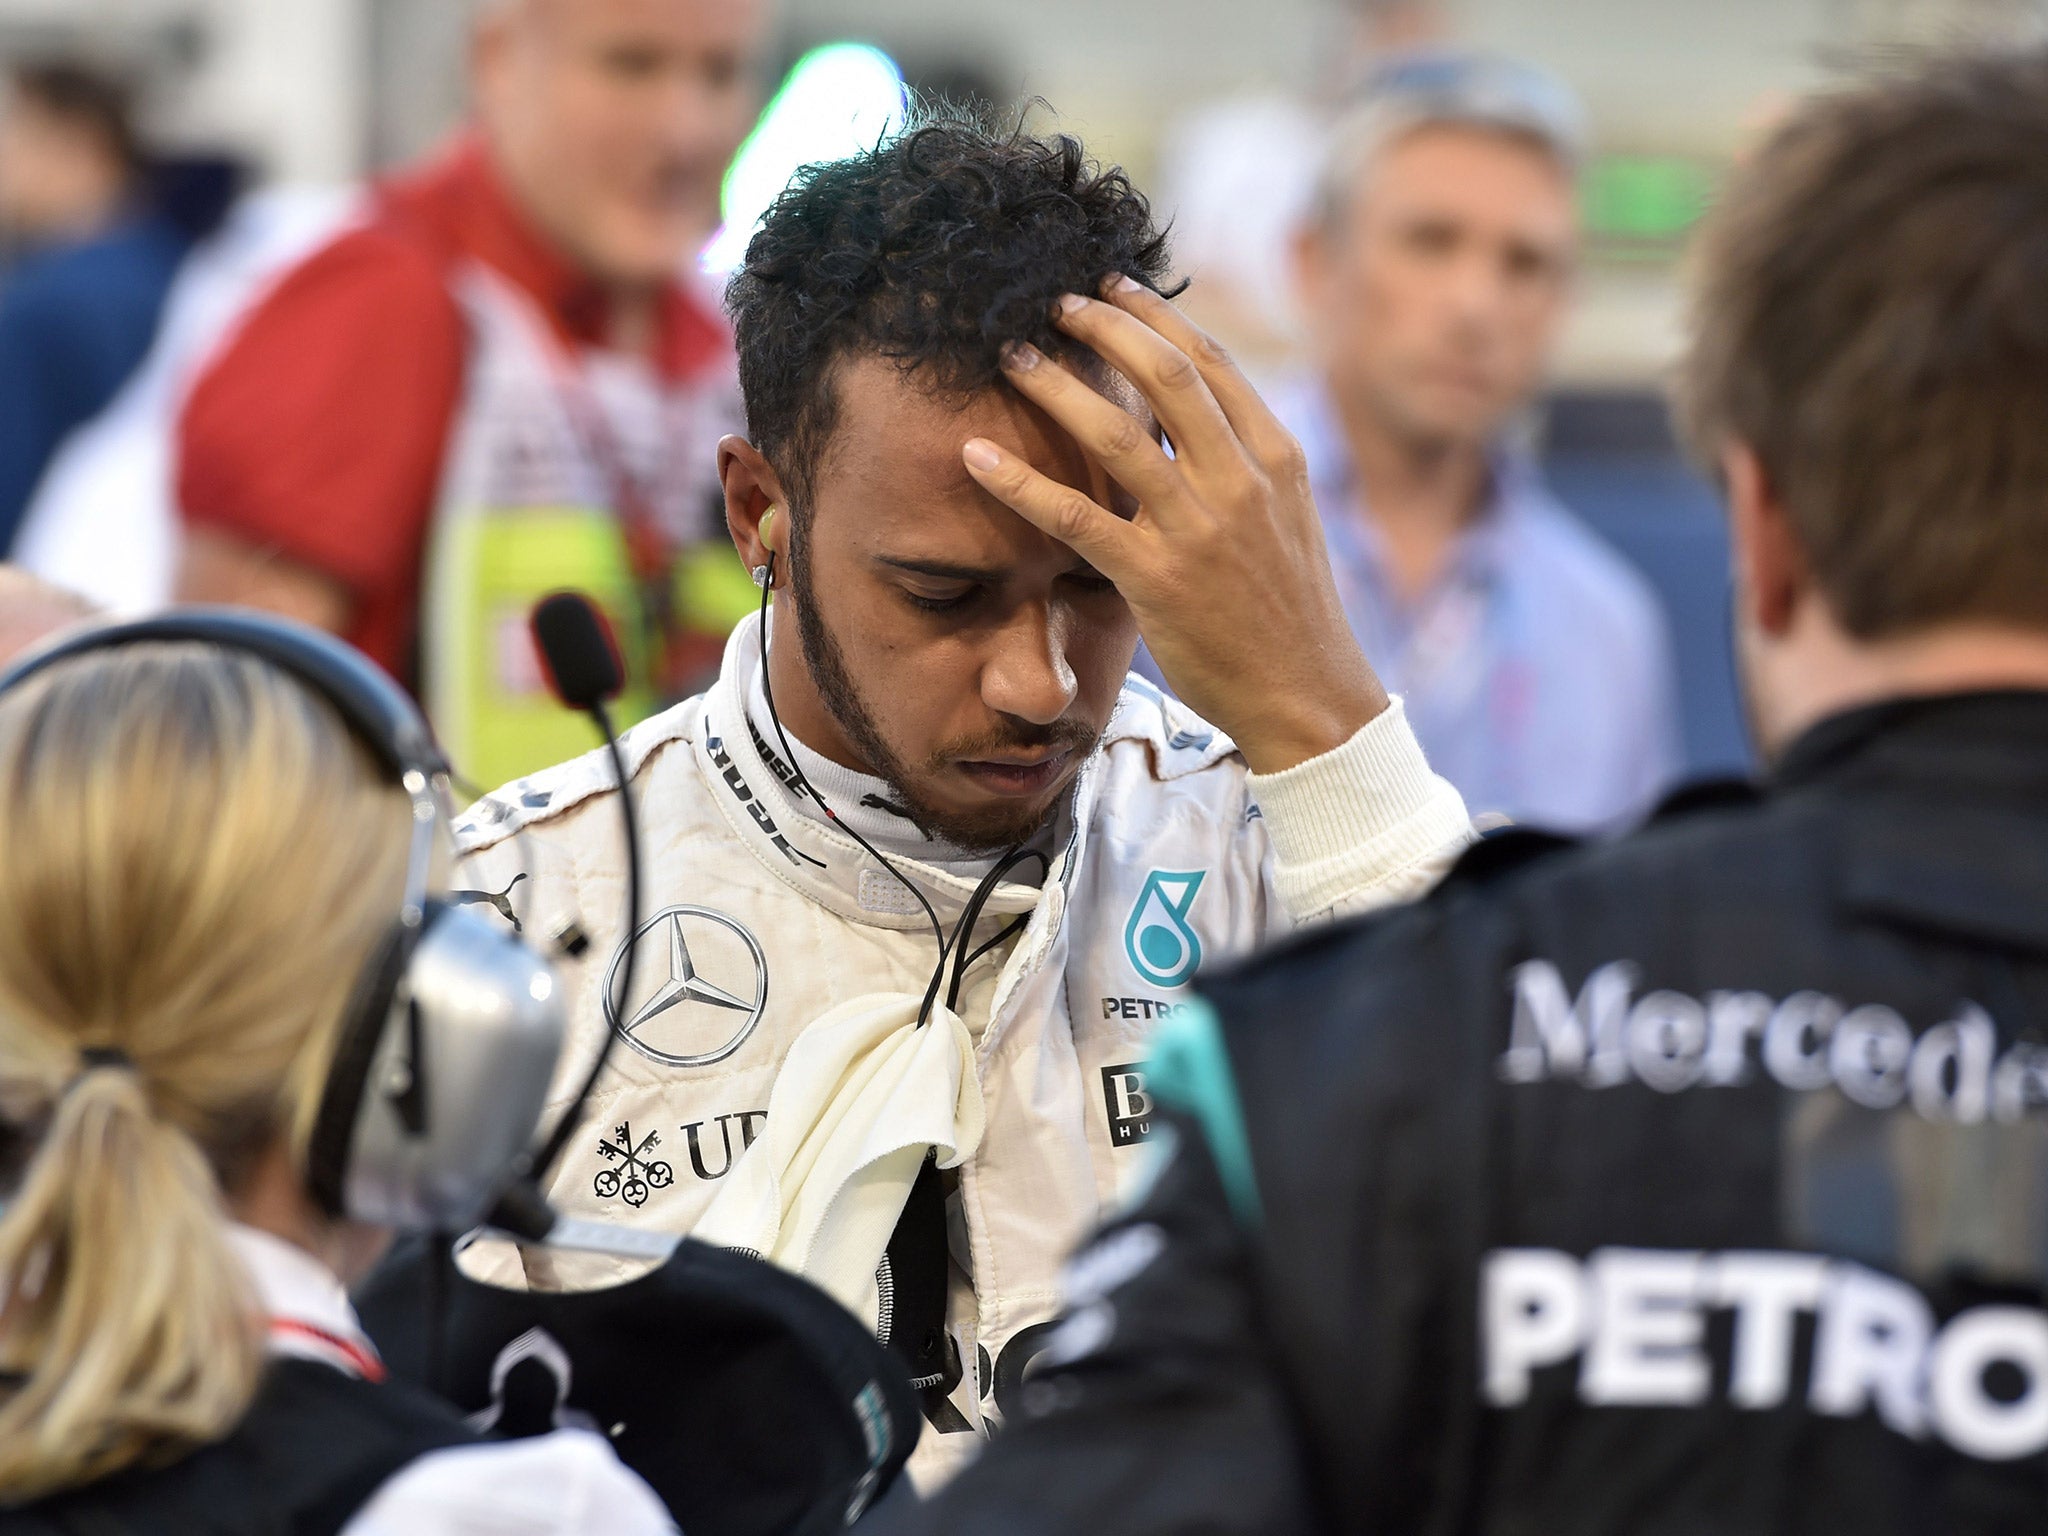 Lewis Hamilton will serve a five-place grid penalty at the Chinese Grand Prix